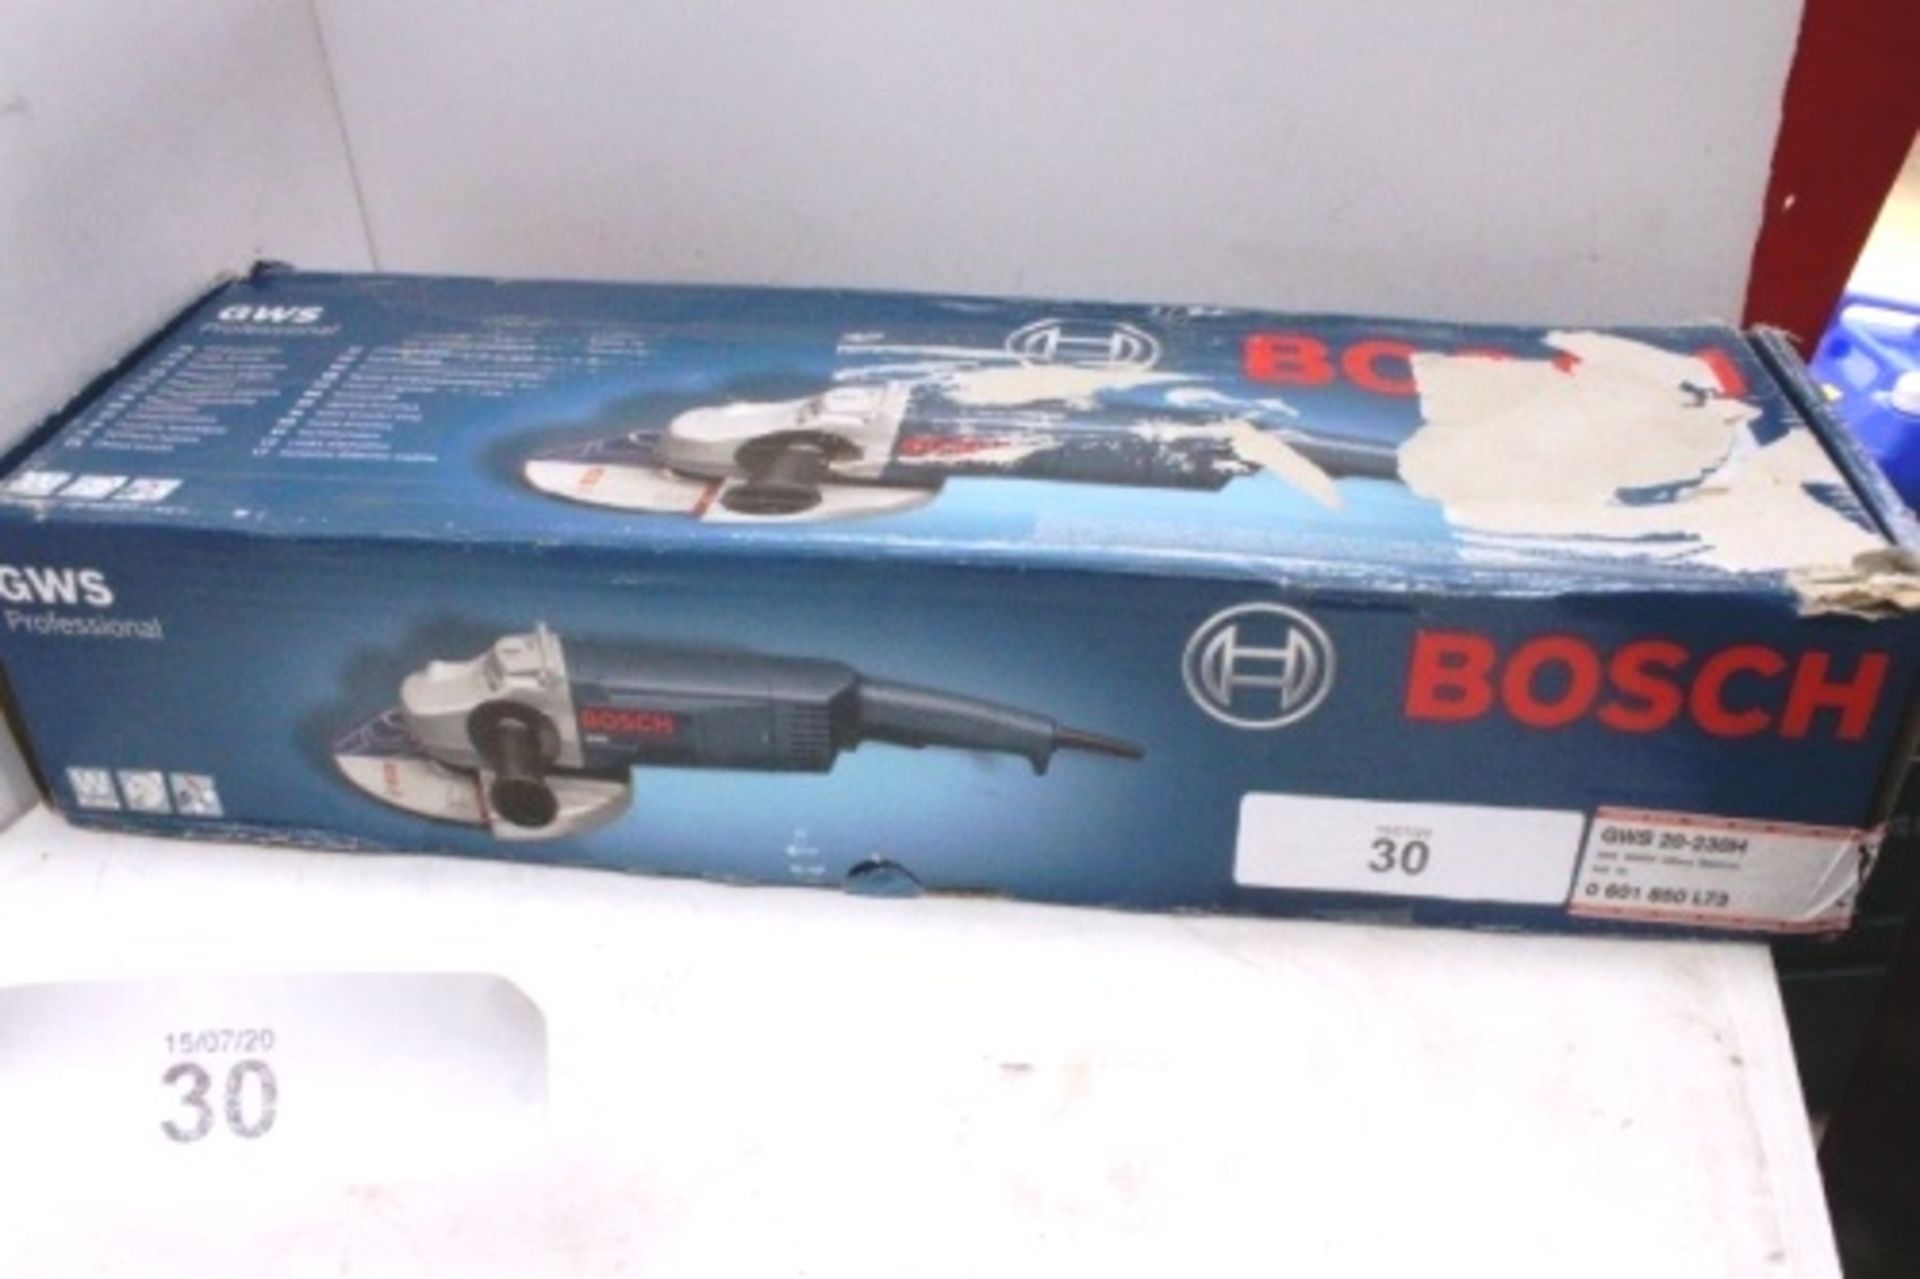 Bosch Professional 230mm angle grinder, 230V, model GWS 20-230H - Sealed new in box (TC)